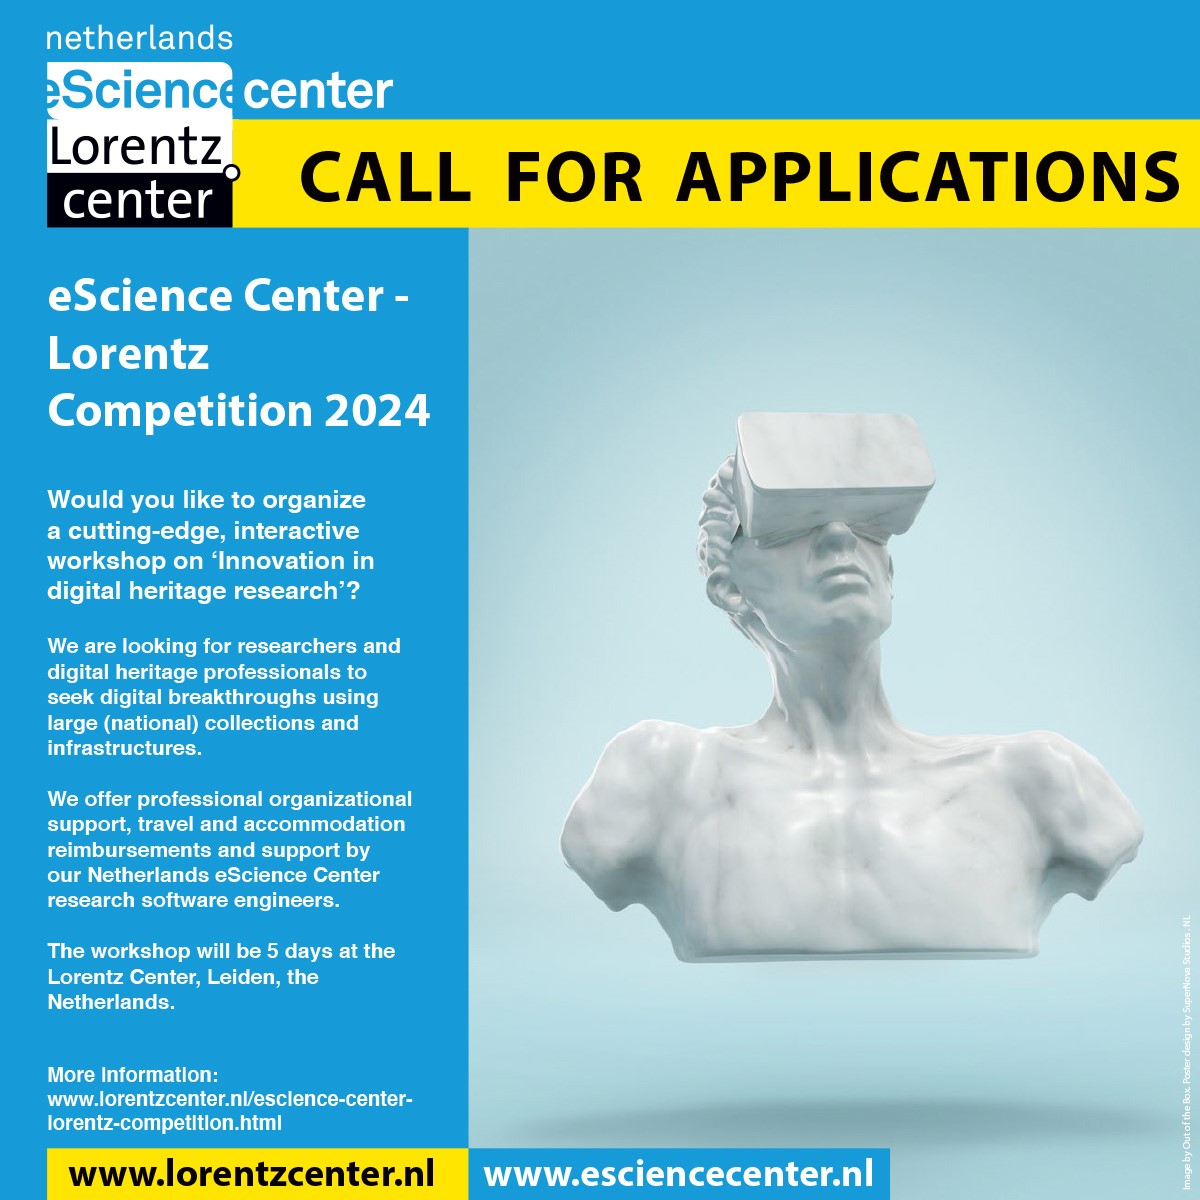 The eScience Center-@lorentzcenter competition is now open! Each year, we invite researchers to apply for the opportunity to organize a cutting-edge, innovative workshop. This year's theme is #Innovation in #Digital #Heritage #Research. Apply by 3 May! esciencecenter.nl/calls-for-prop…